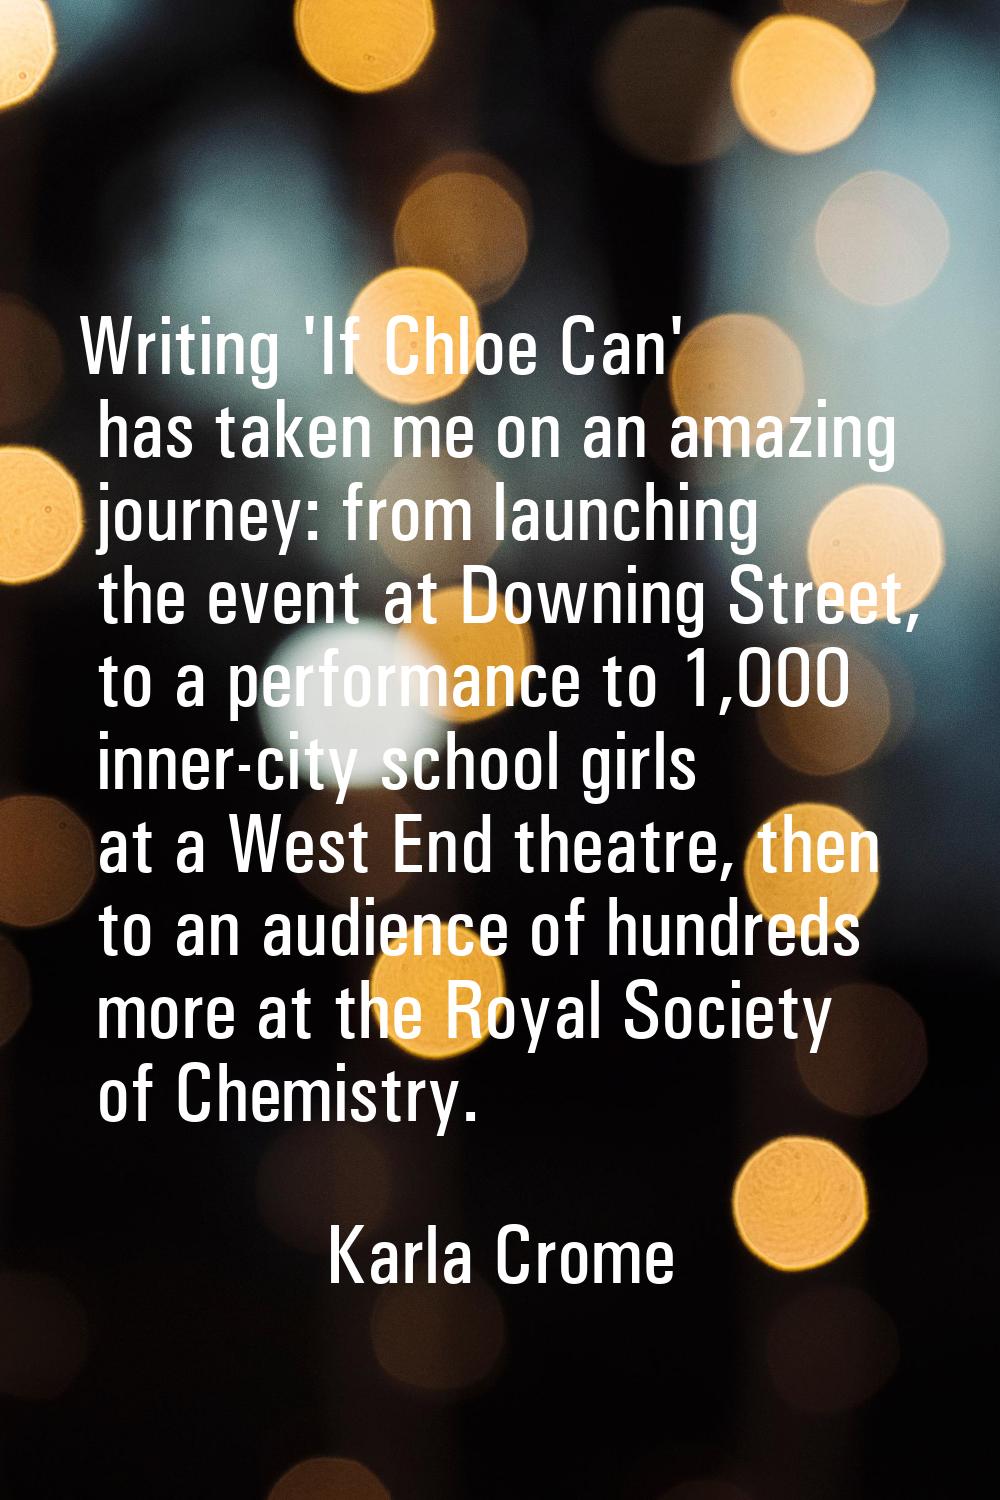 Writing 'If Chloe Can' has taken me on an amazing journey: from launching the event at Downing Stre